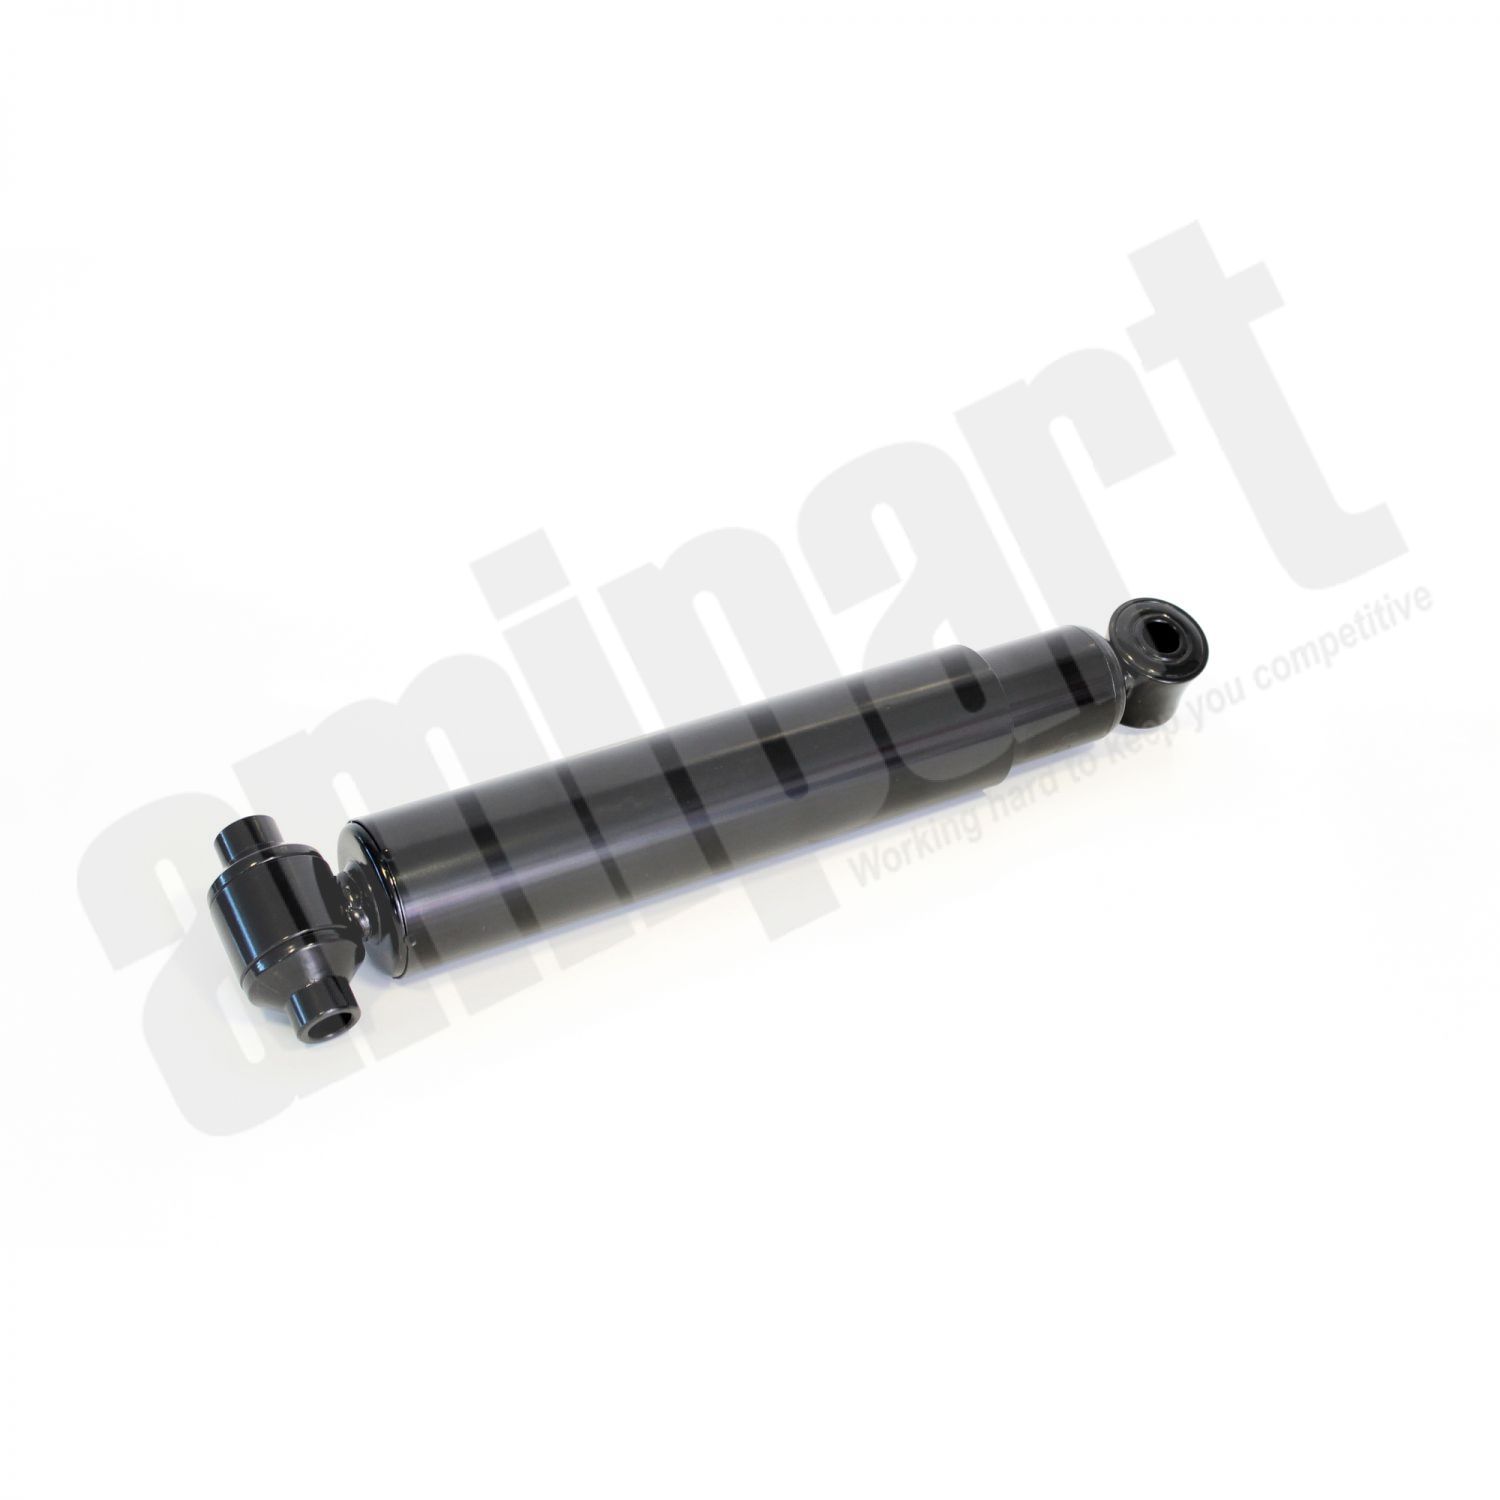 Amipart - SCANIA SHOCK ABSORBER